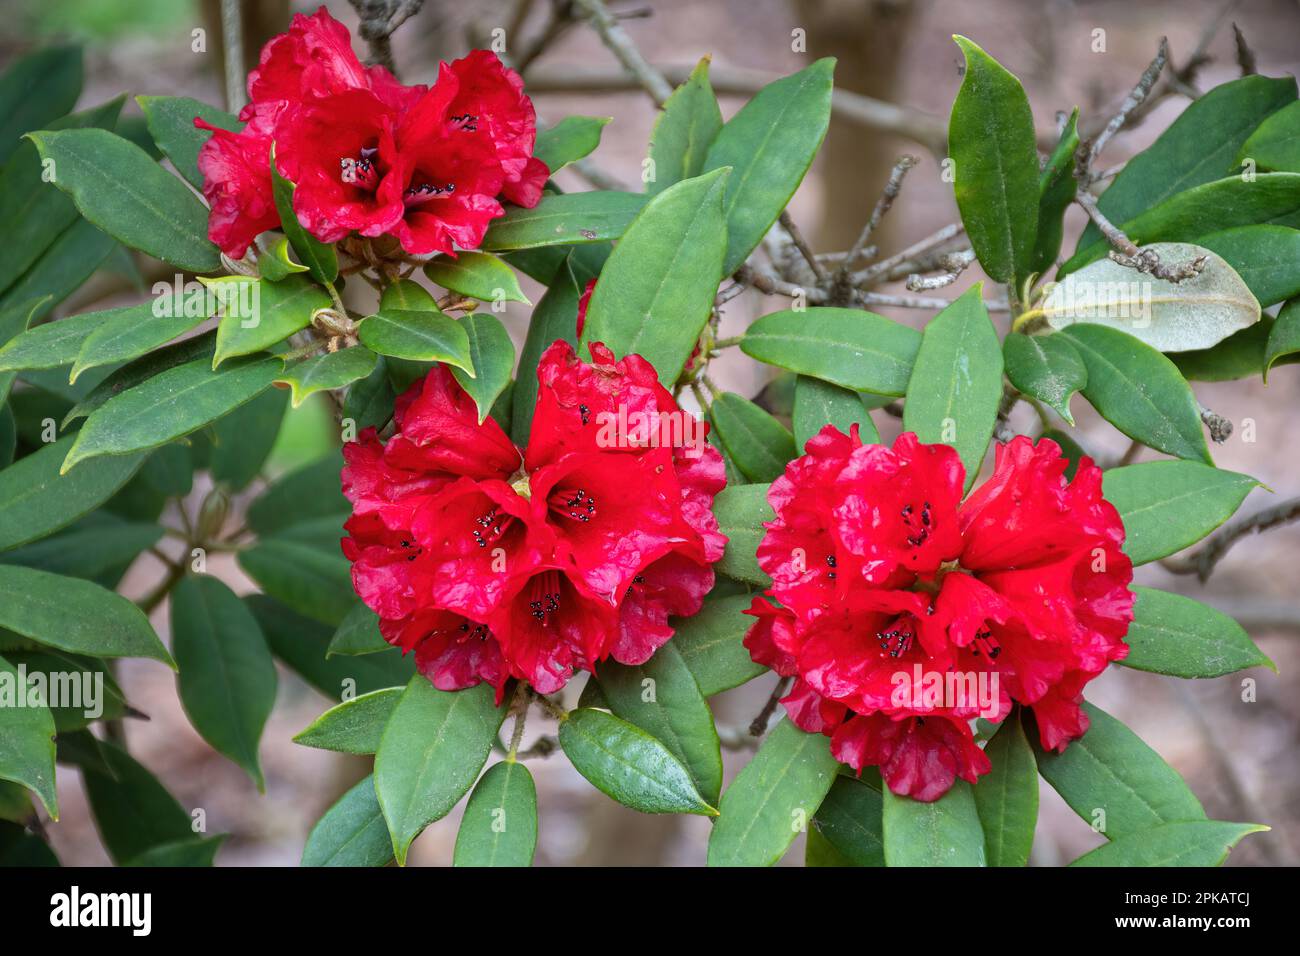 Red flowers or blooms of the evergreen shrub or small tree Rhododendron ochraceum (subsection Maculifera) in Spring, UK Stock Photo